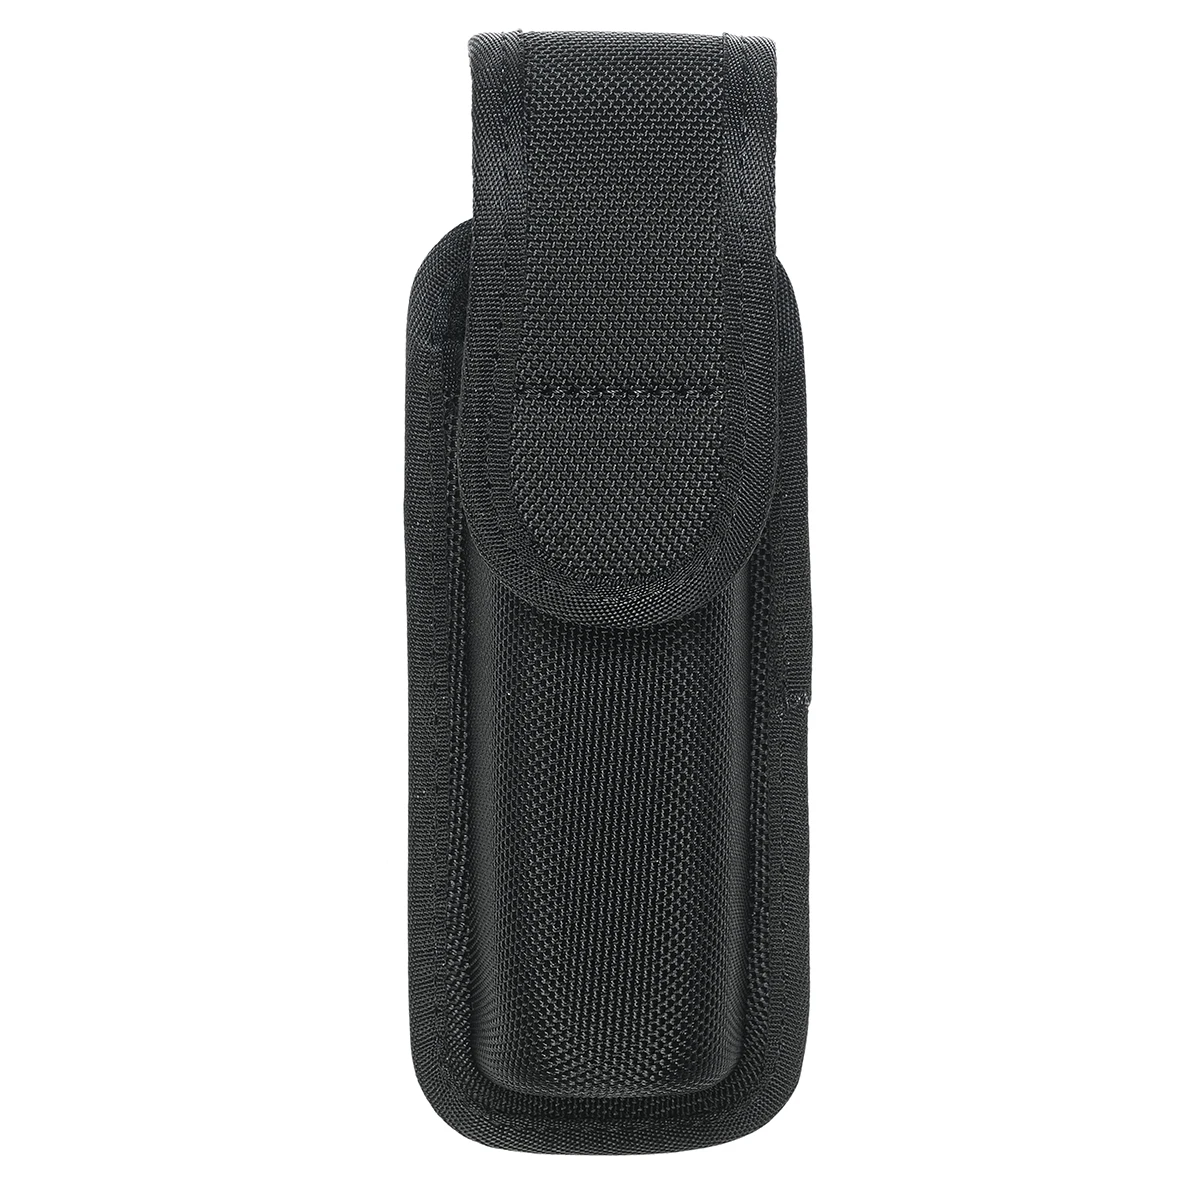 Molded OC/Mace Spray Pouch For Duty Belt, OC Spray Holder Pouch With Removable Top Cover and Hidden Snap,Top Flap Police Duty OC